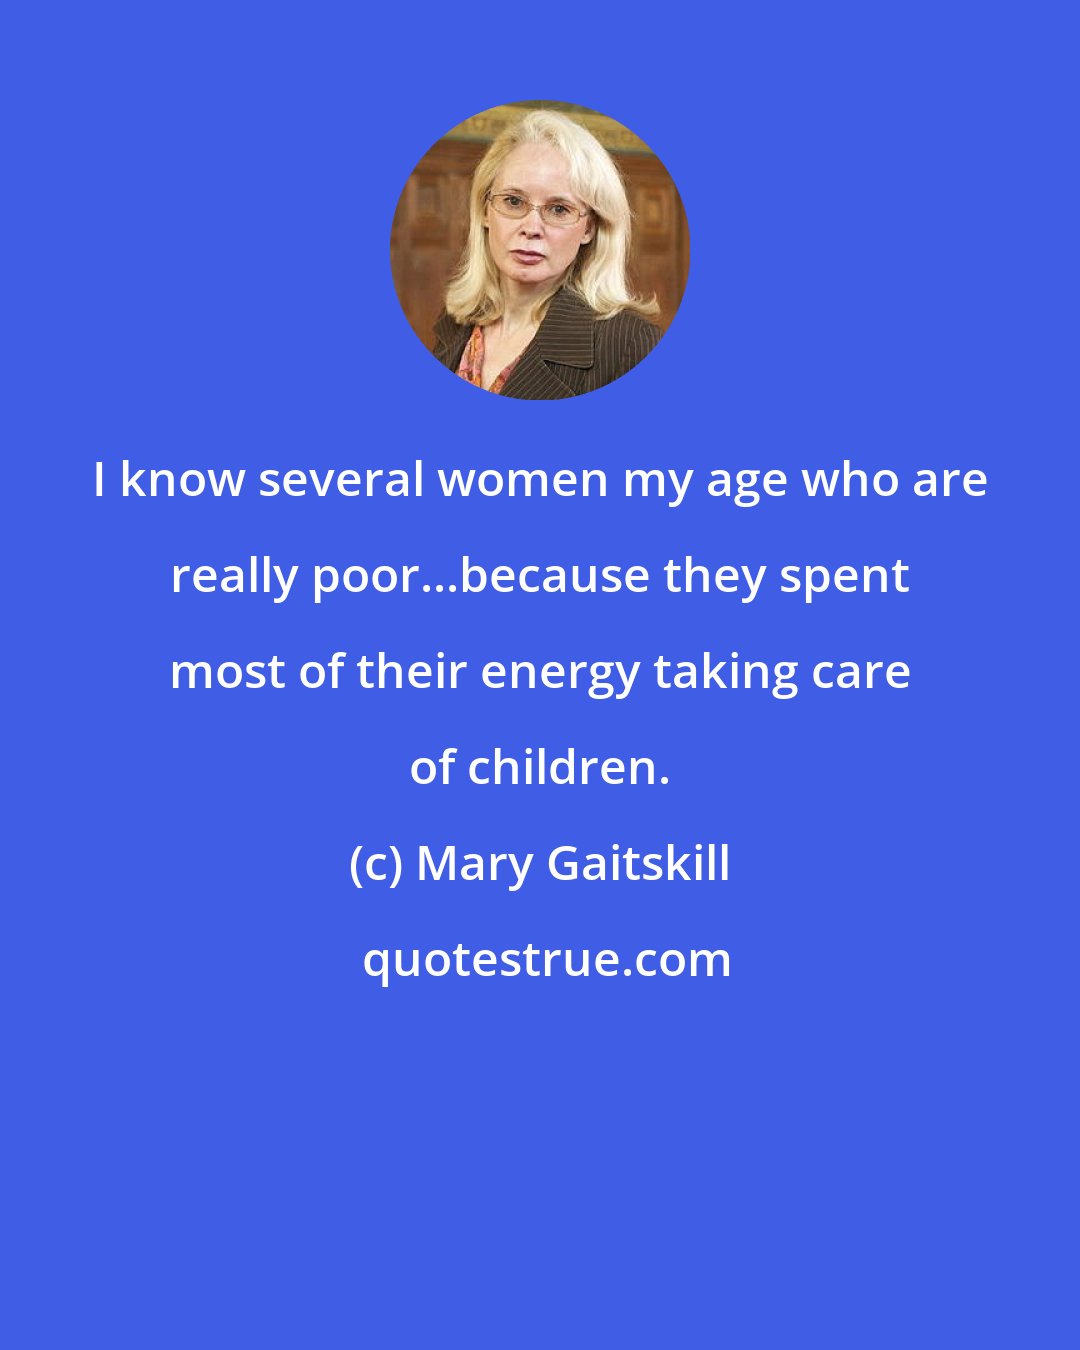 Mary Gaitskill: I know several women my age who are really poor...because they spent most of their energy taking care of children.